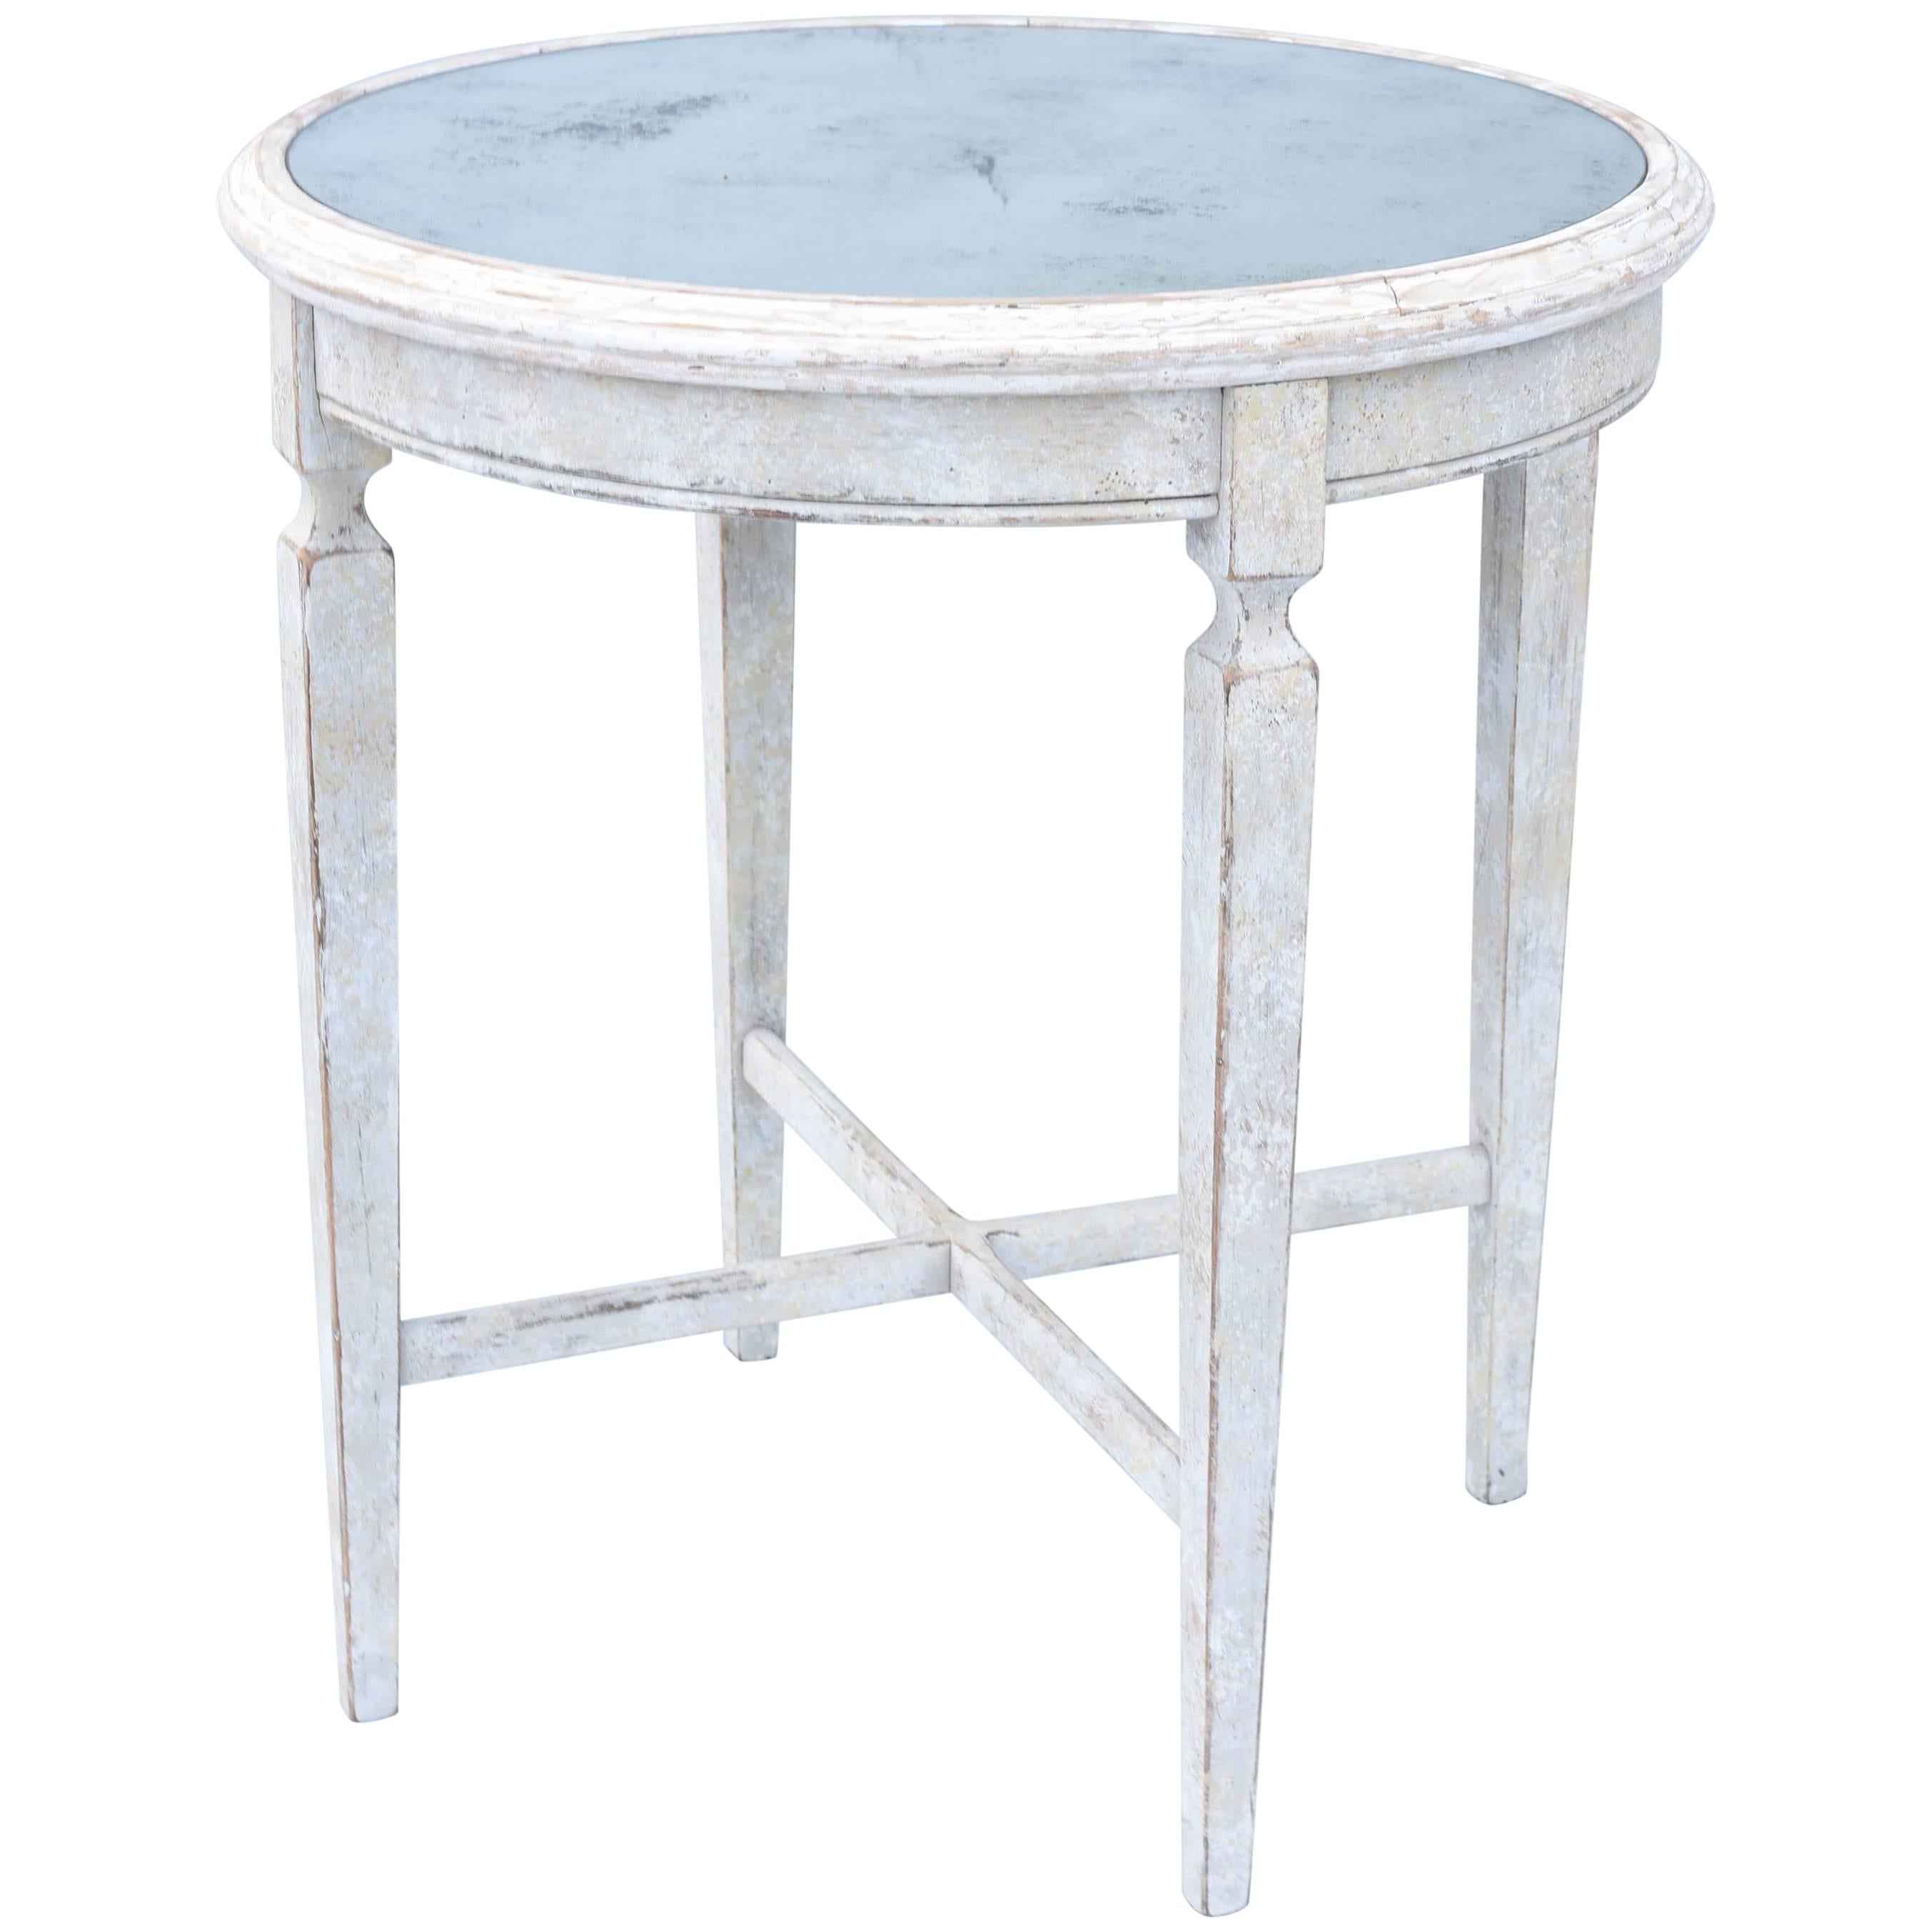 Painted Occasional Table with Mirrored Top